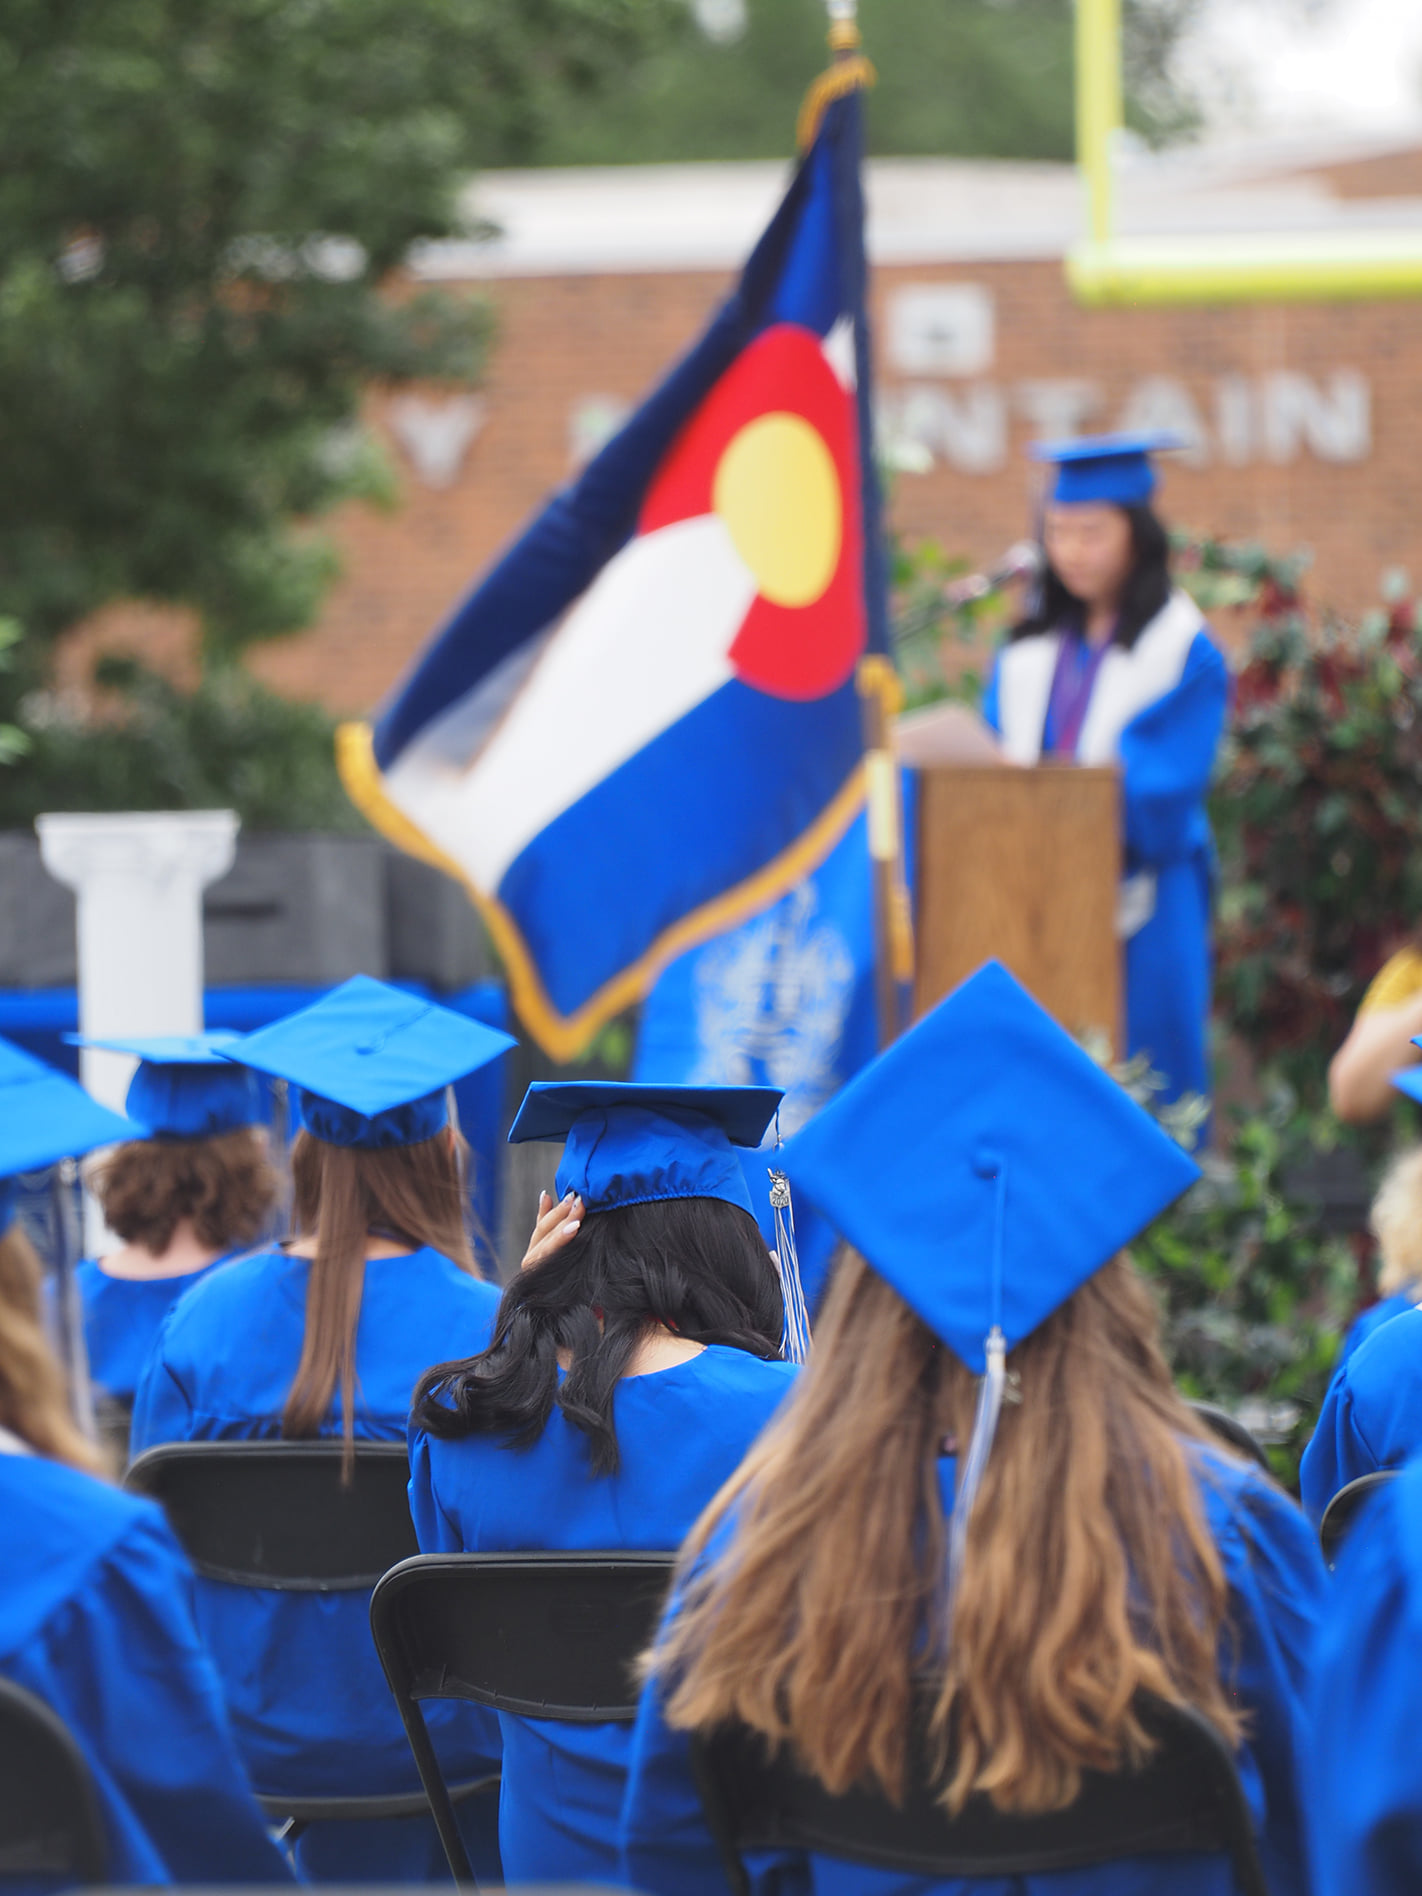 PHS grads with the Colorado flag in the background.